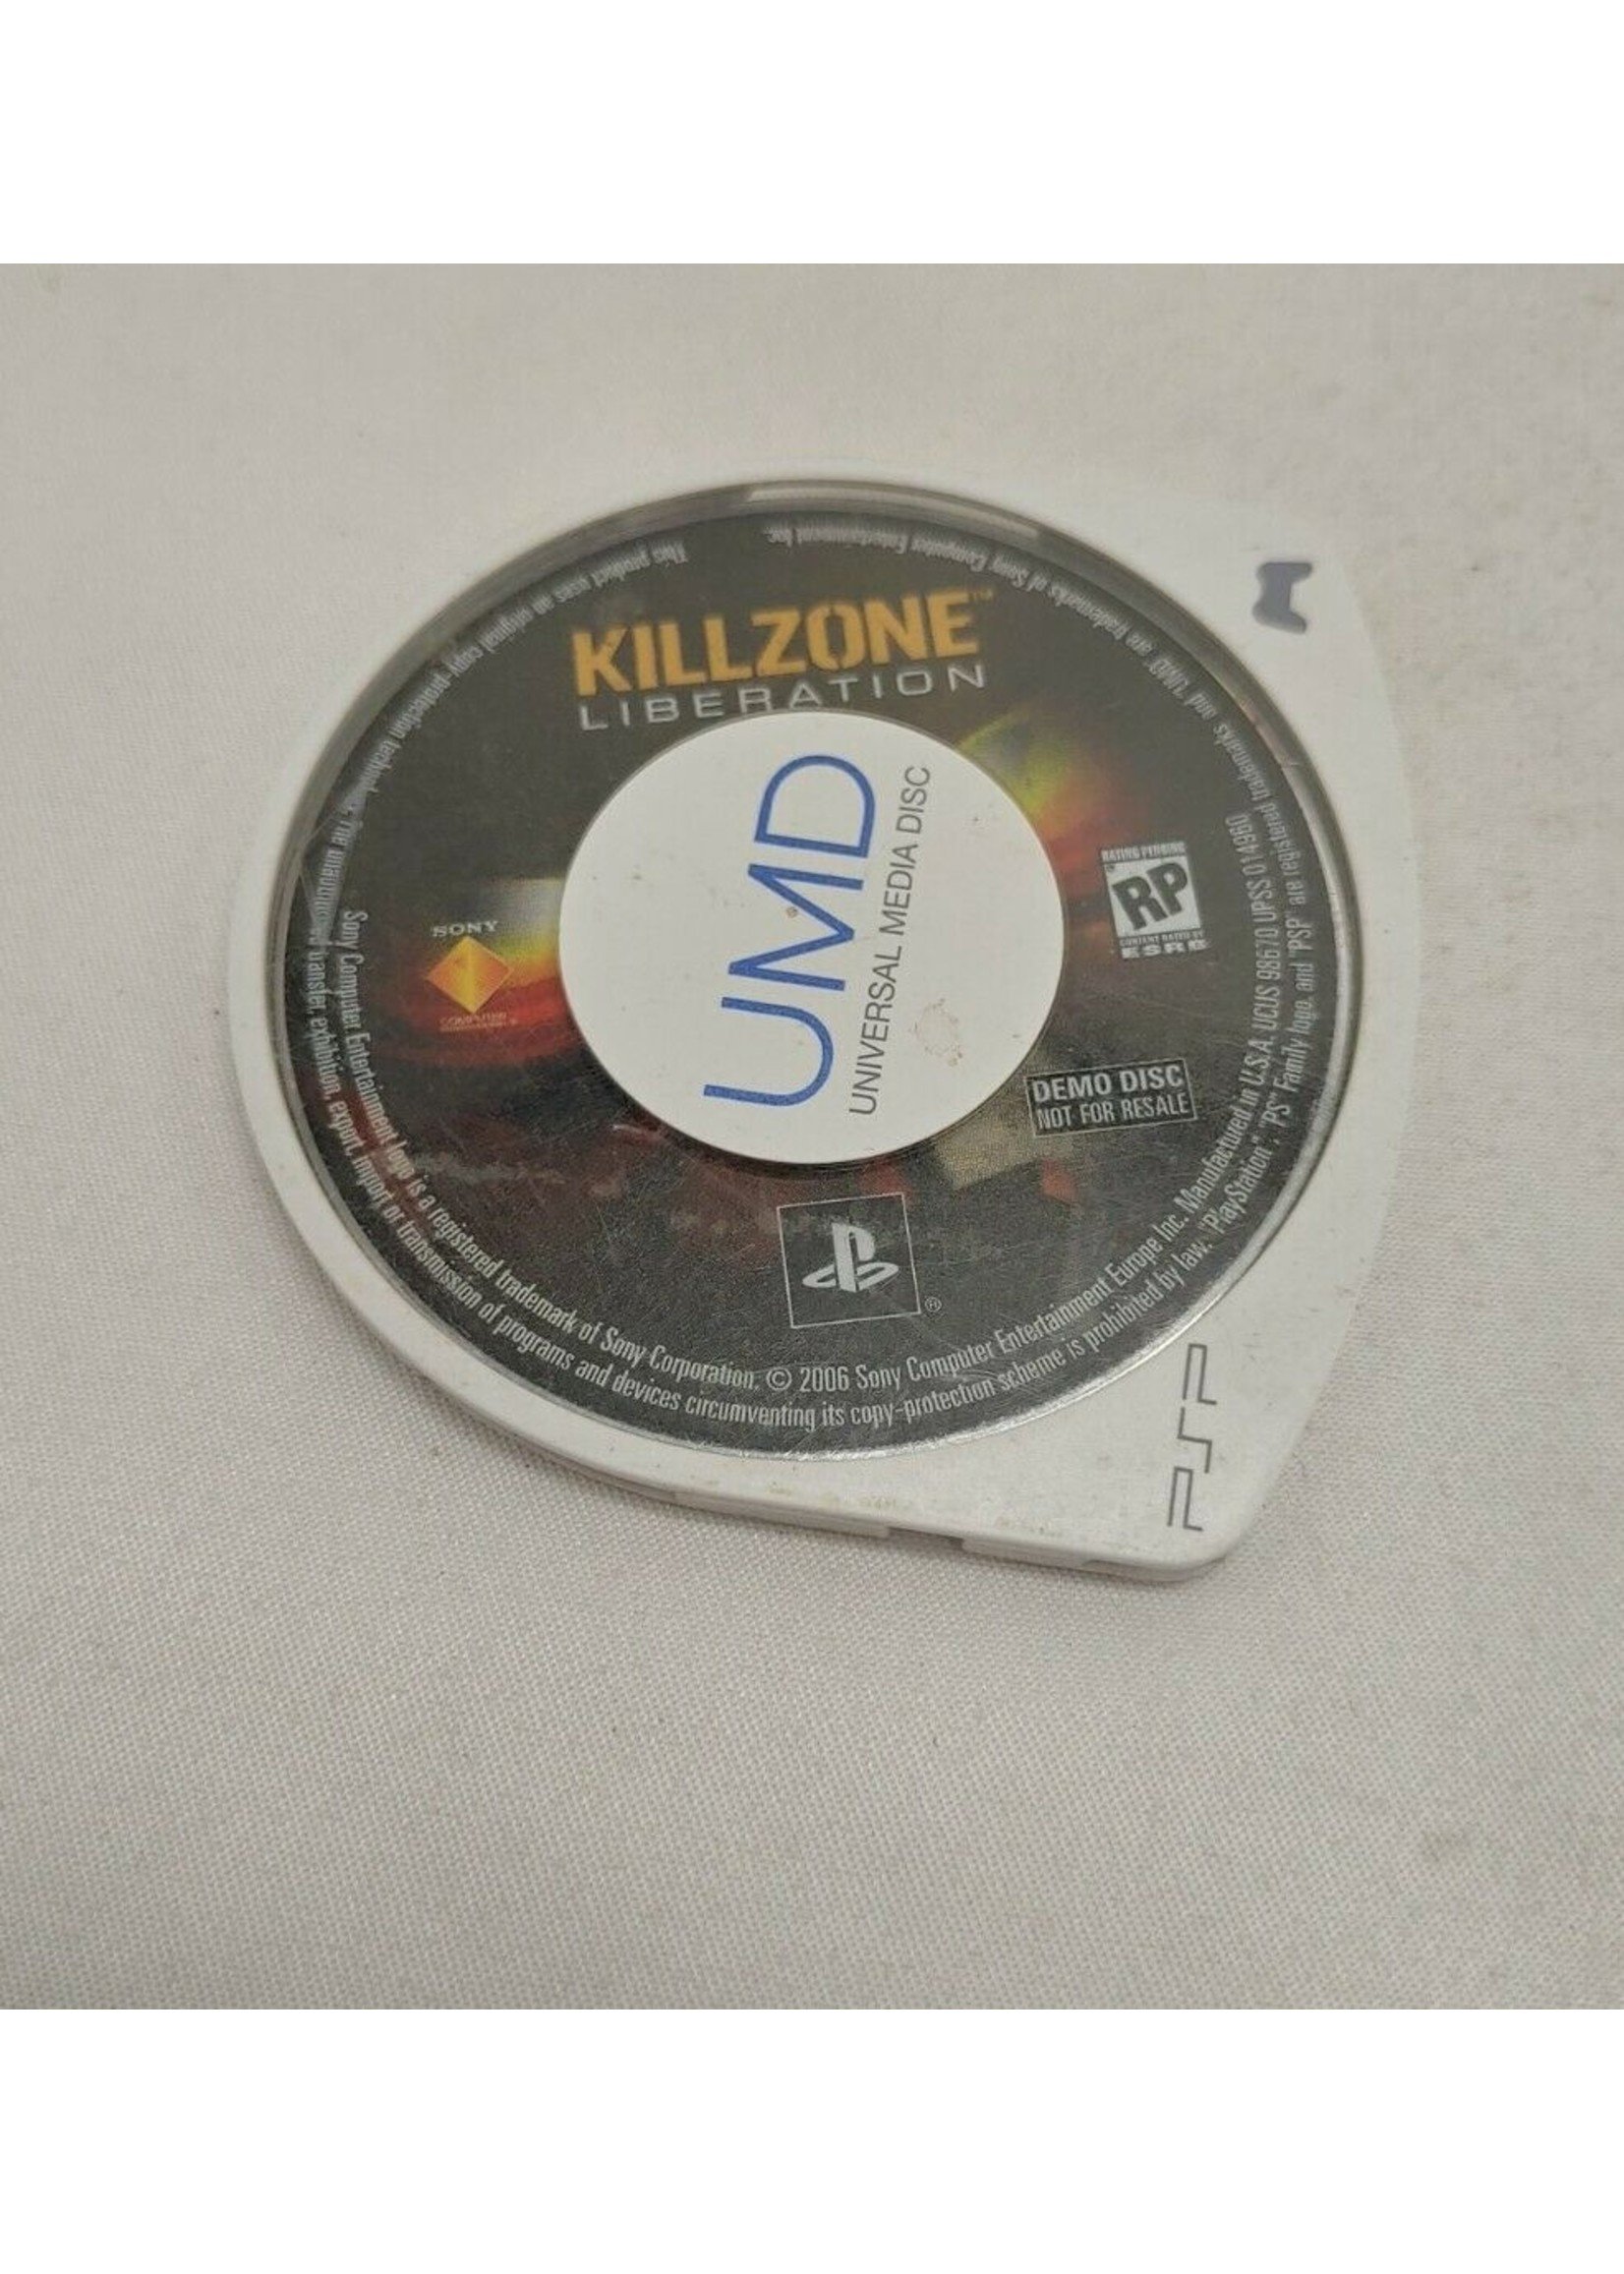 Sony Playstation Portable (PSP) Killzone Liberation (Game Only)